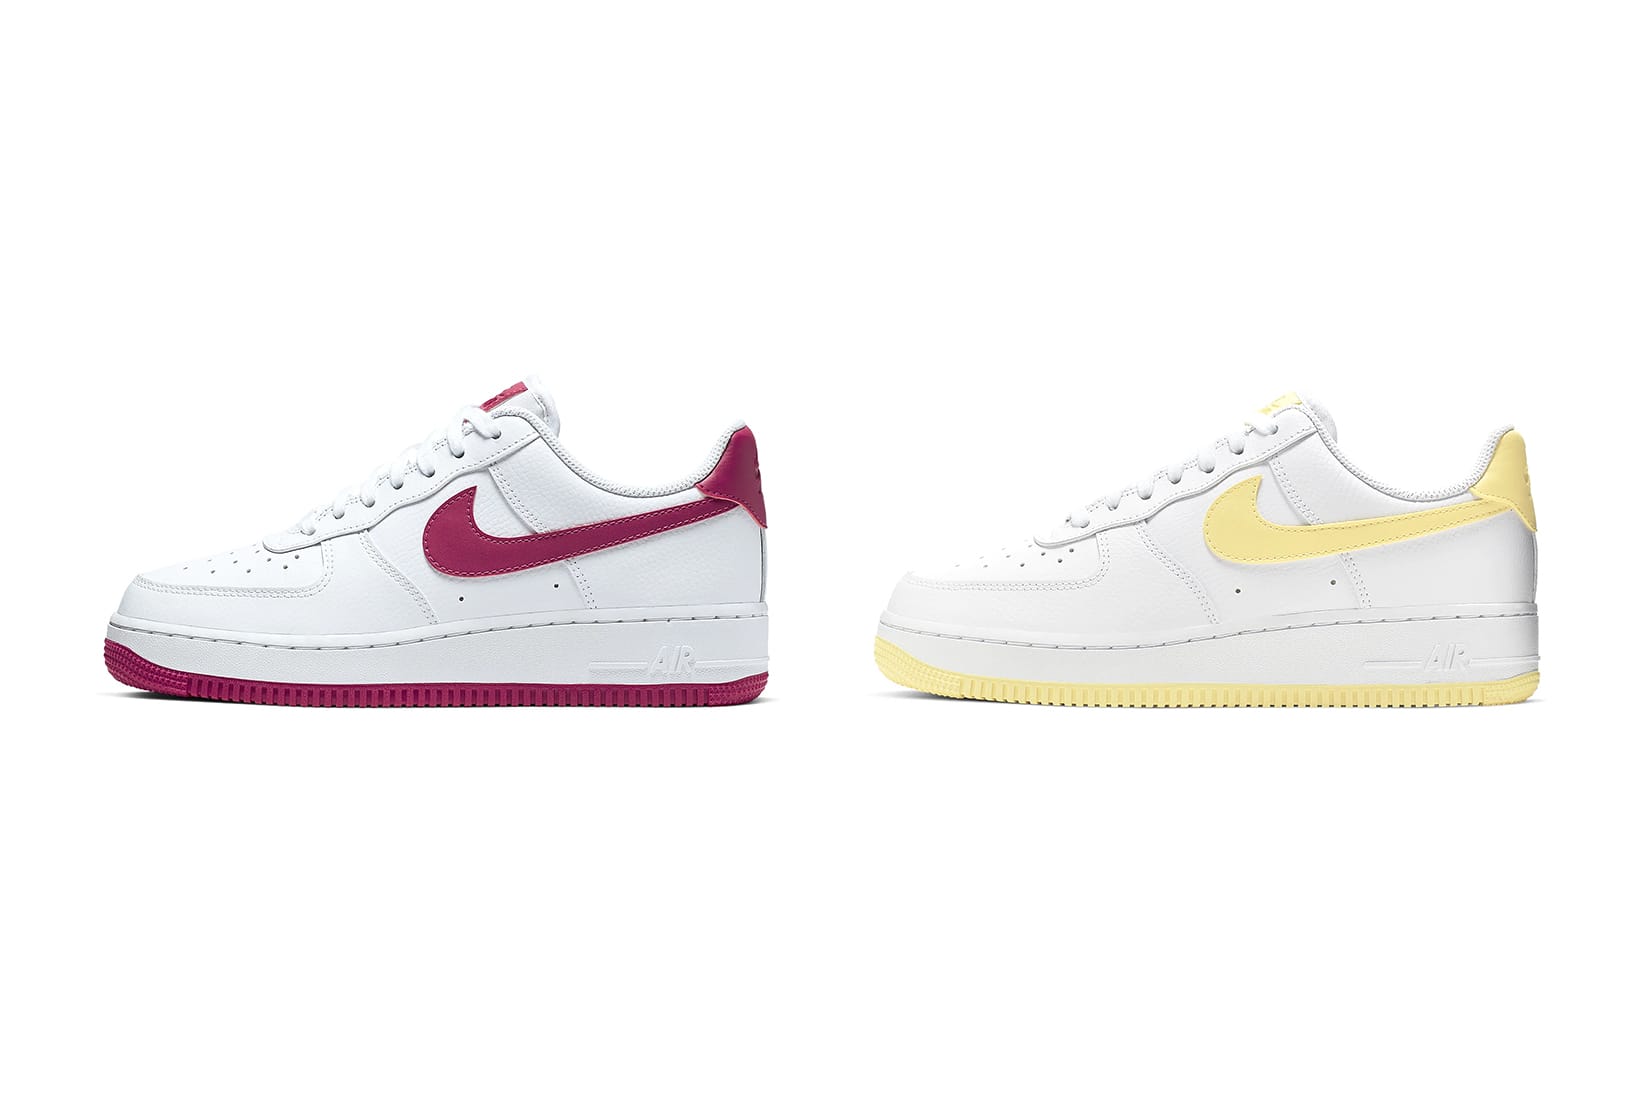 Nike's Air Force 1 '07 in Two New 